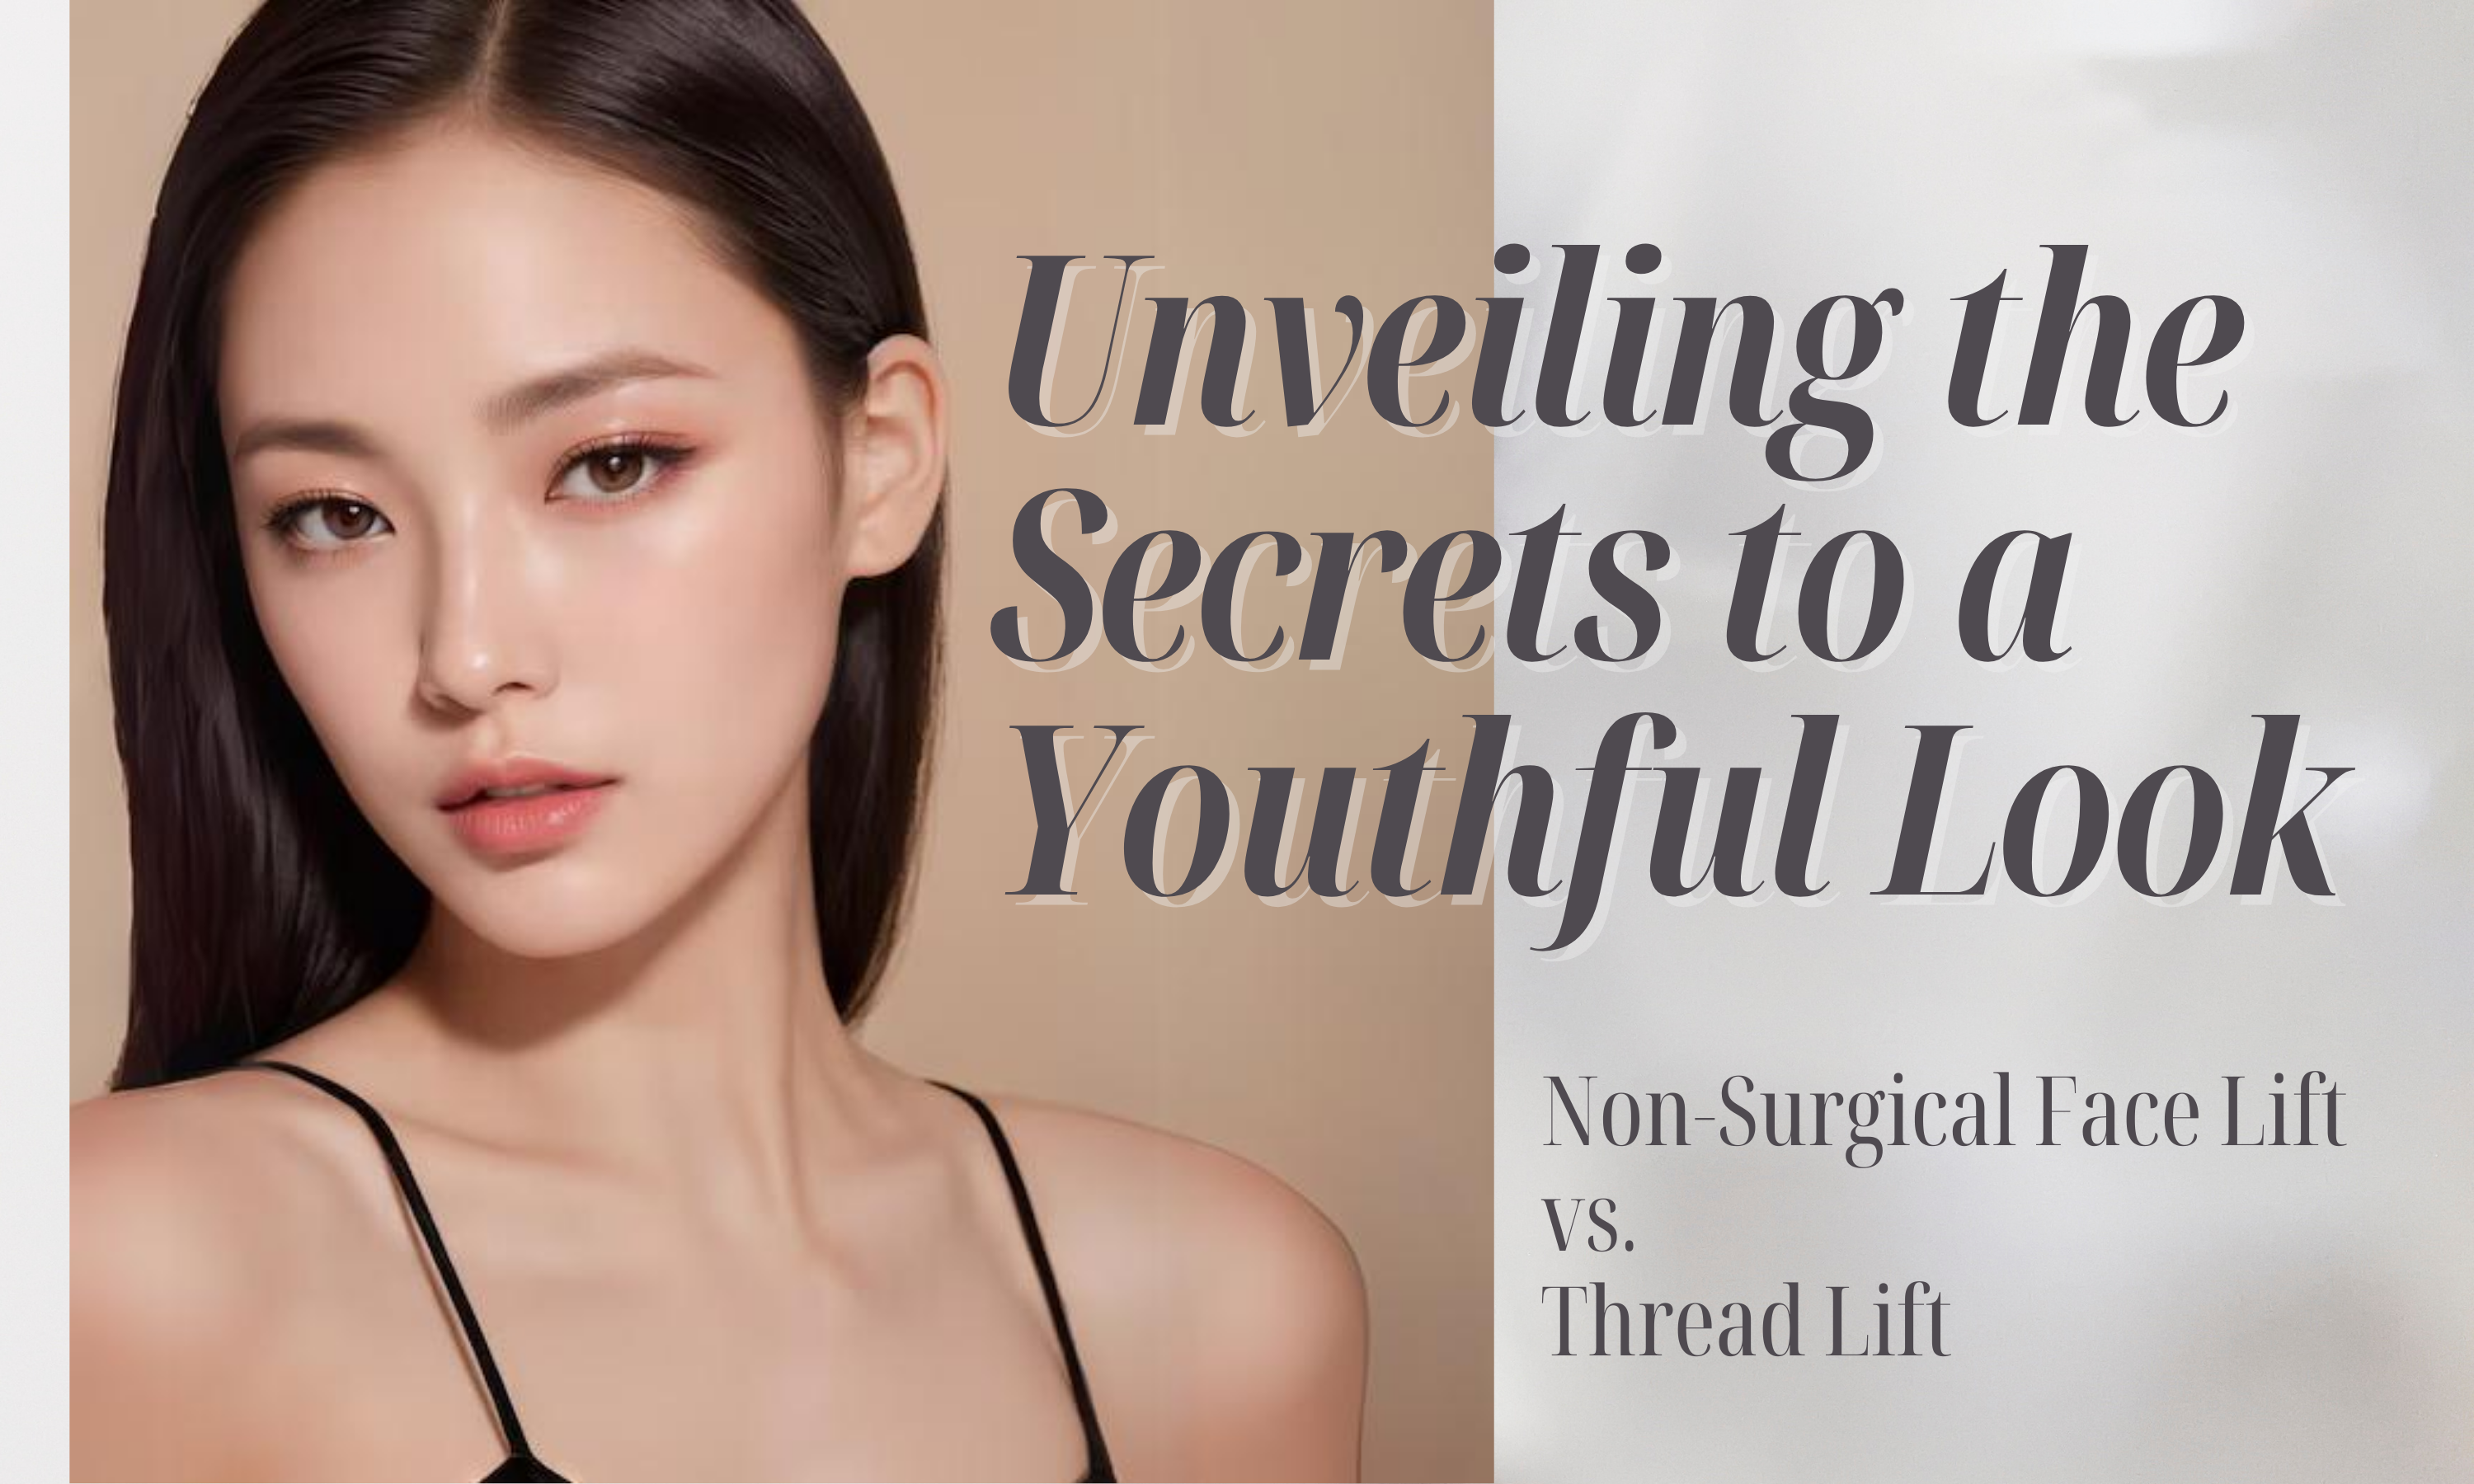 Non-Surgical Face Lift vs Thread Lift: Unveiling the Secrets to a Youthful Look